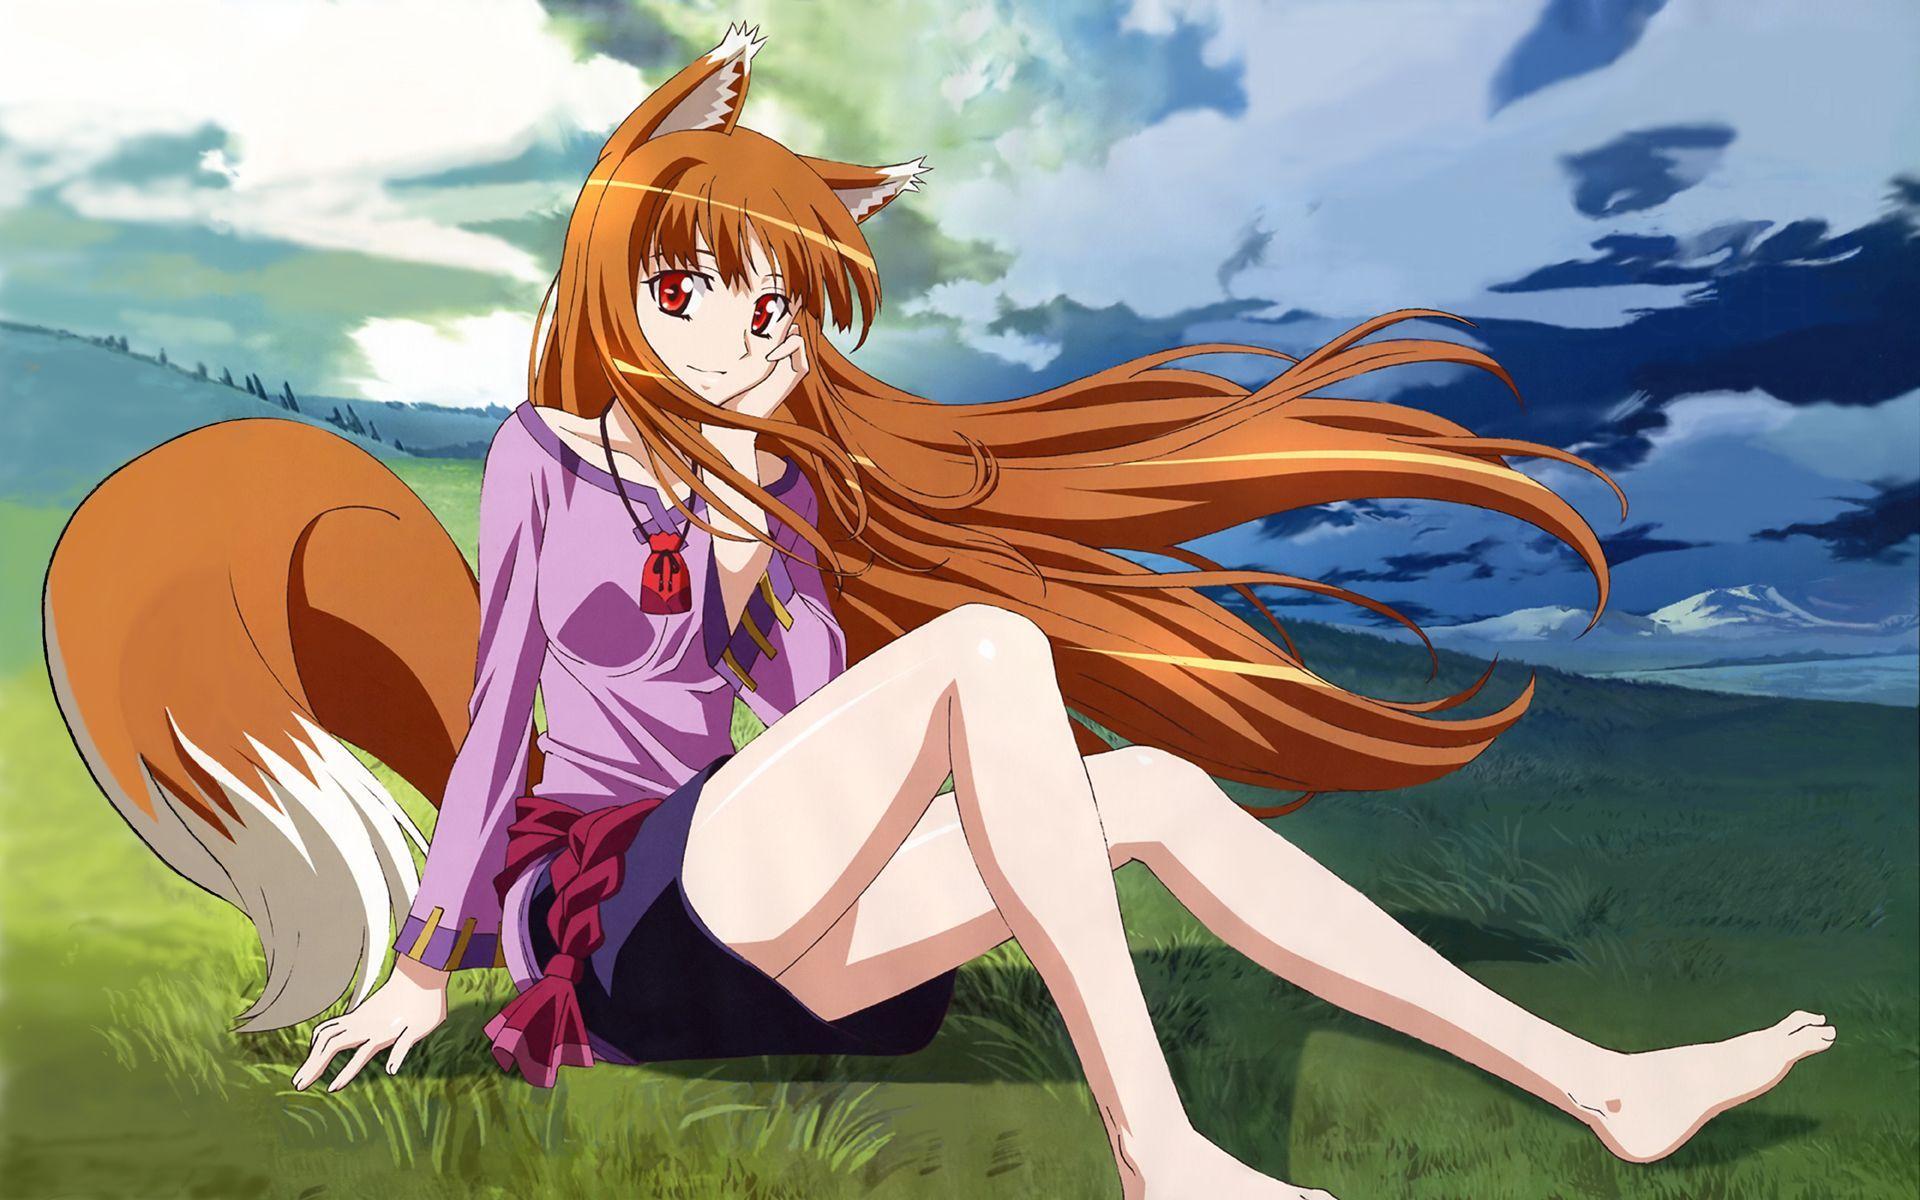 252-2527227_hd-holo-in-spice-and-wolf-wallpaper.jpg